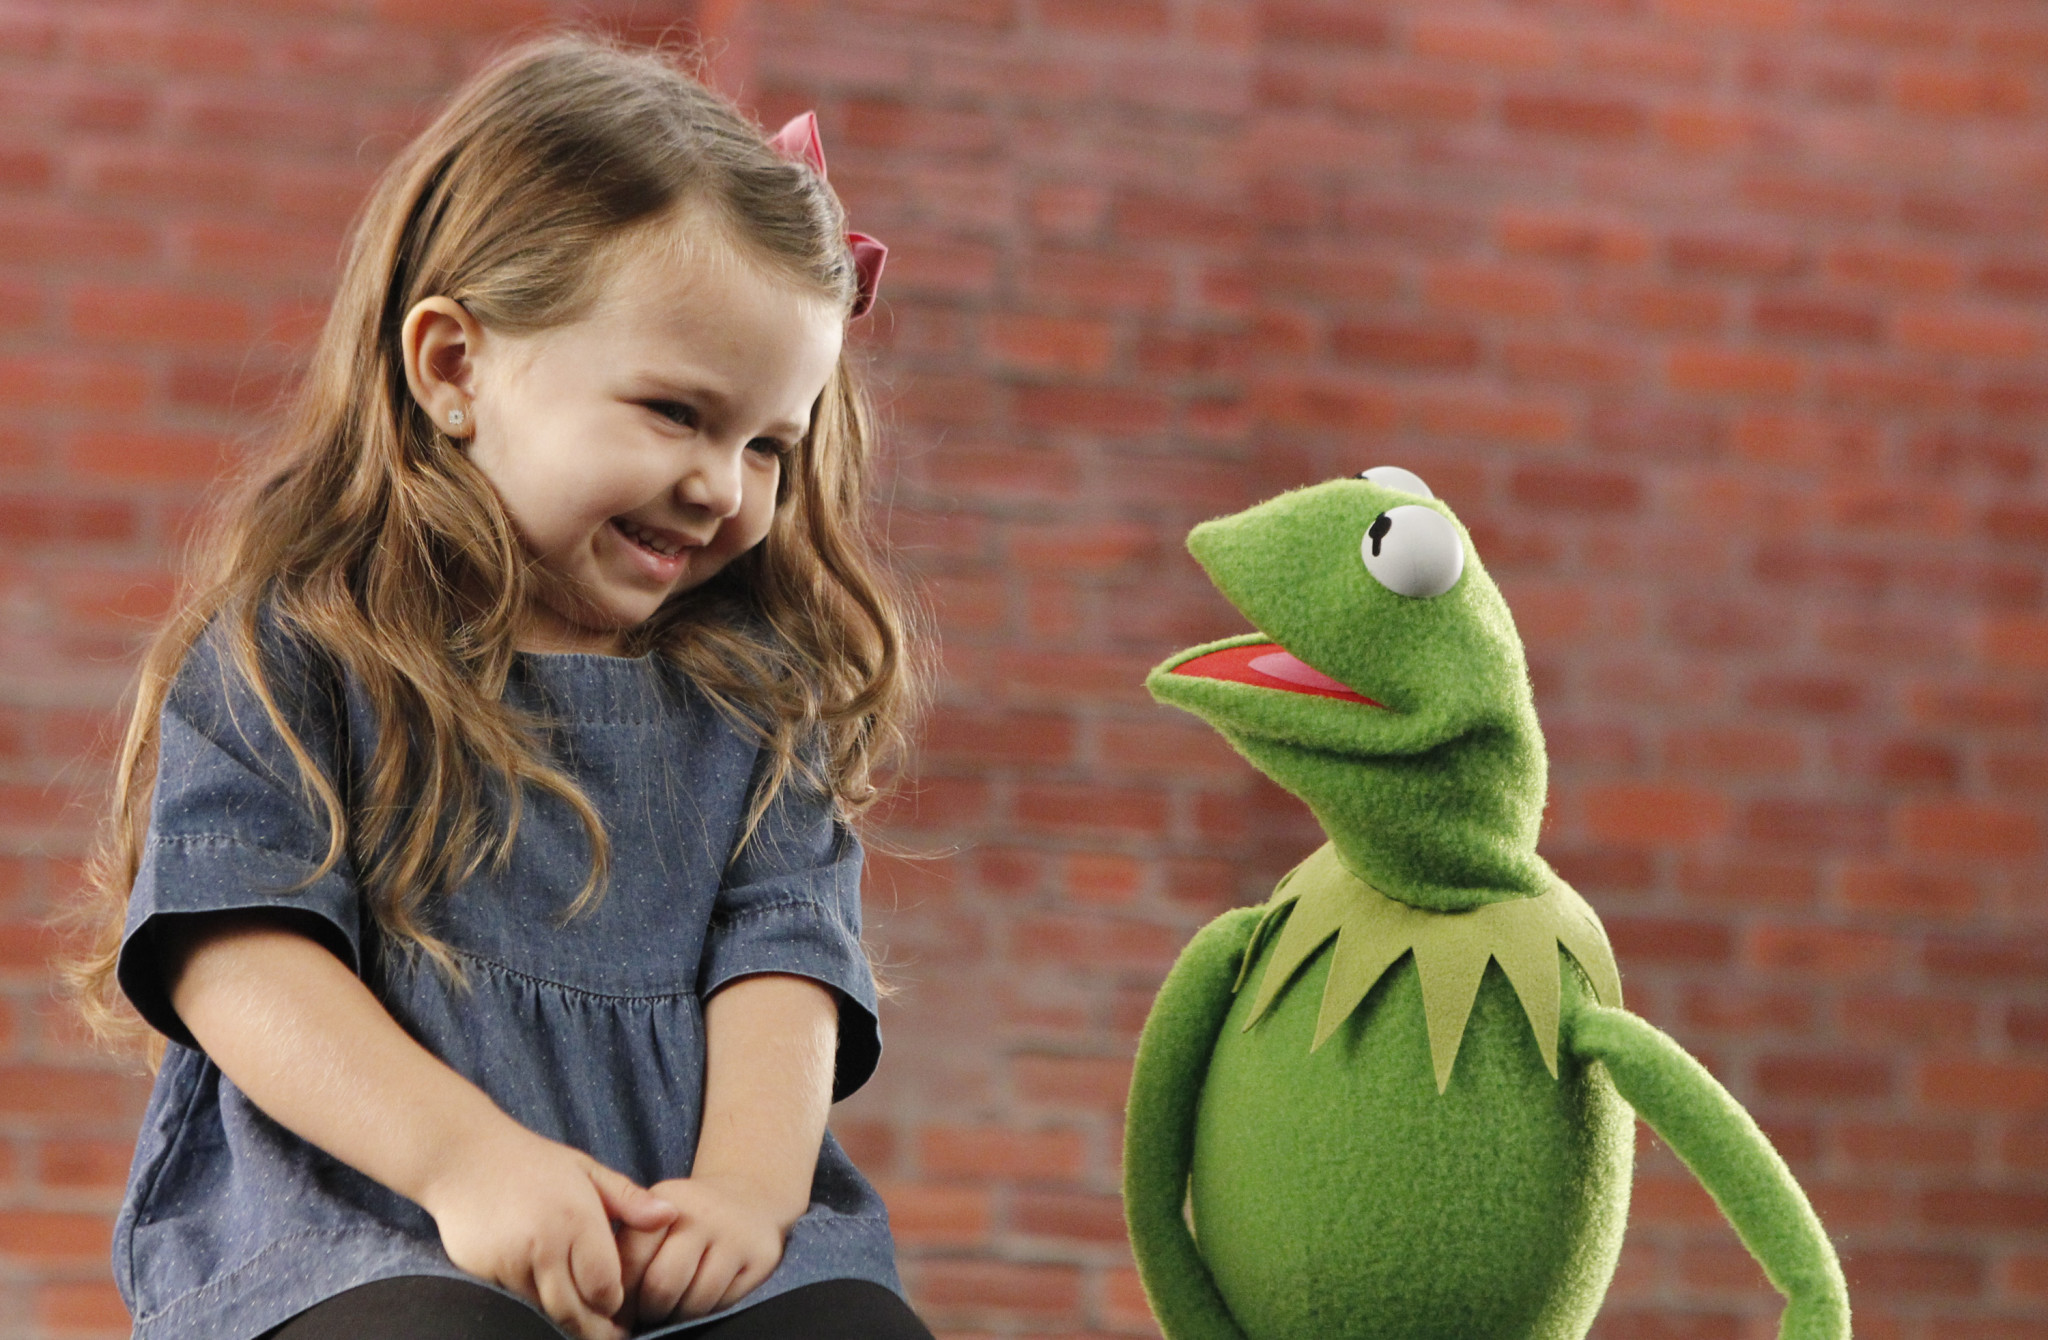 New Muppets Short Series Coming to Disney Junior